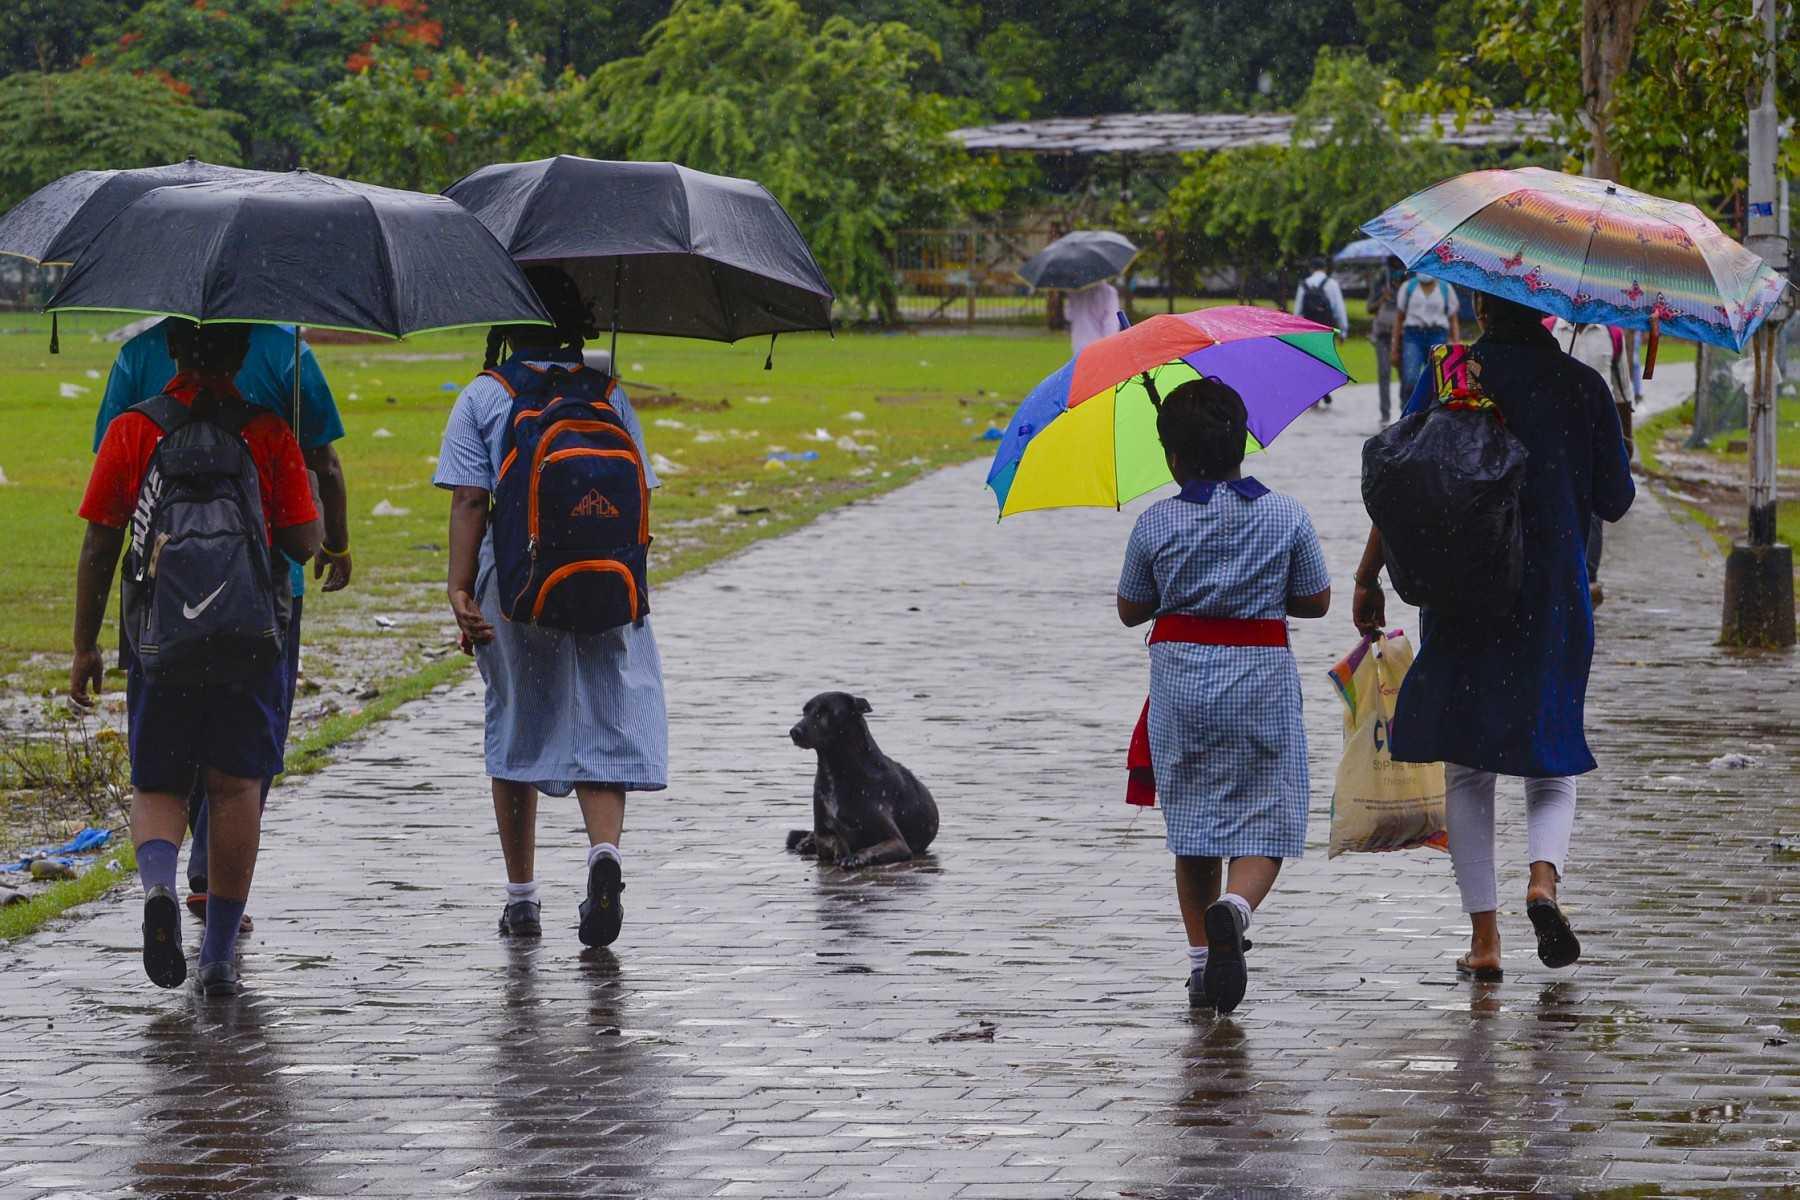 Guardians walk children to school amid rain in Mumbai on June 22, 2022. The legal marriage age in India is 18 but millions of children are forced to tie the knot when they are younger, particularly in poorer rural areas. Photo: AFP
